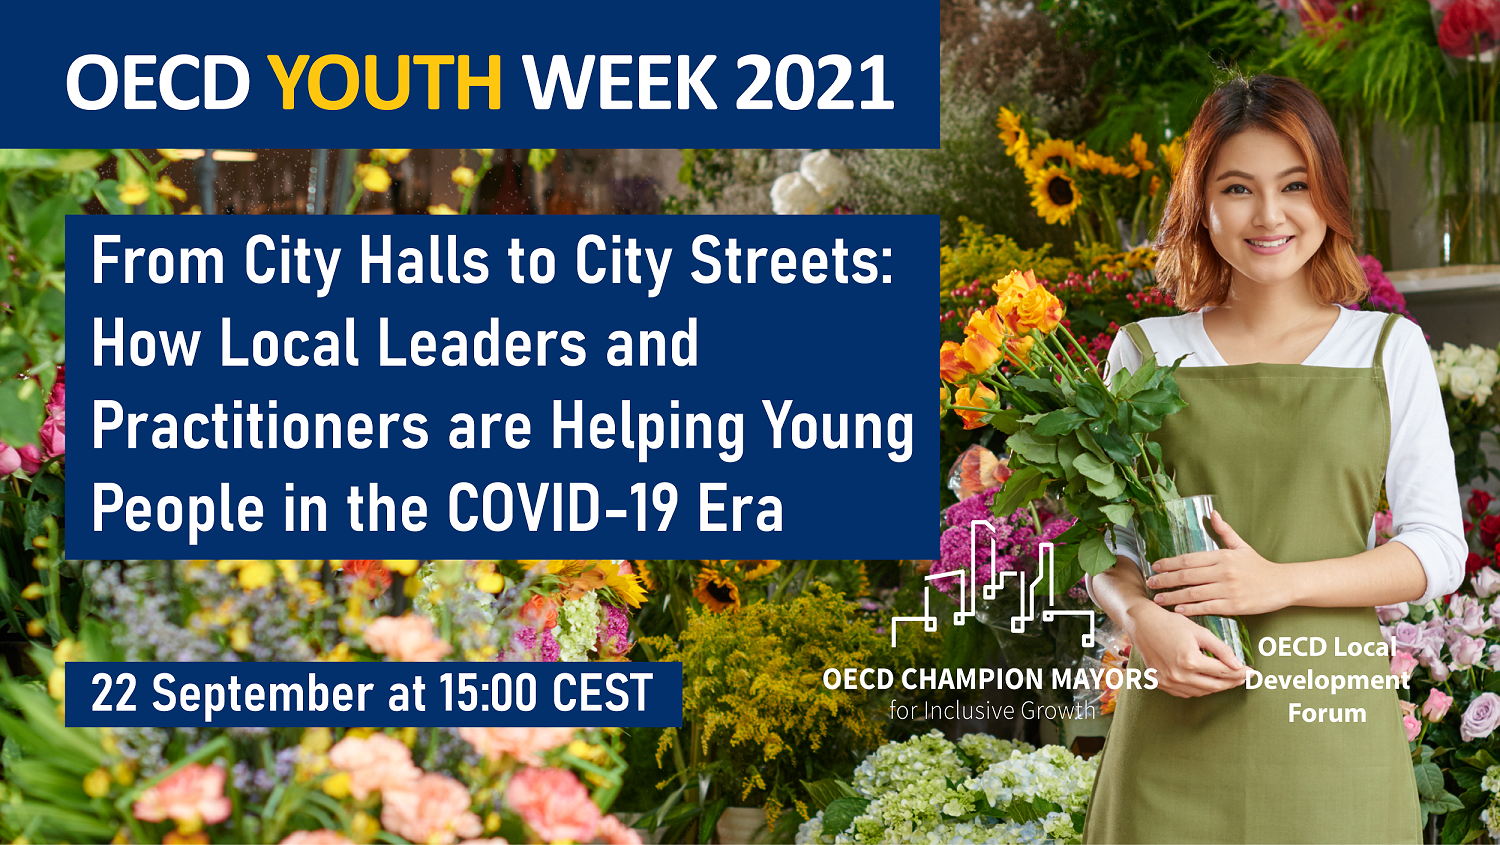 Webinar - From City Halls to City Streets: How Are Local Leaders and Practitioners Helping Young People in the COVID-19 Era?